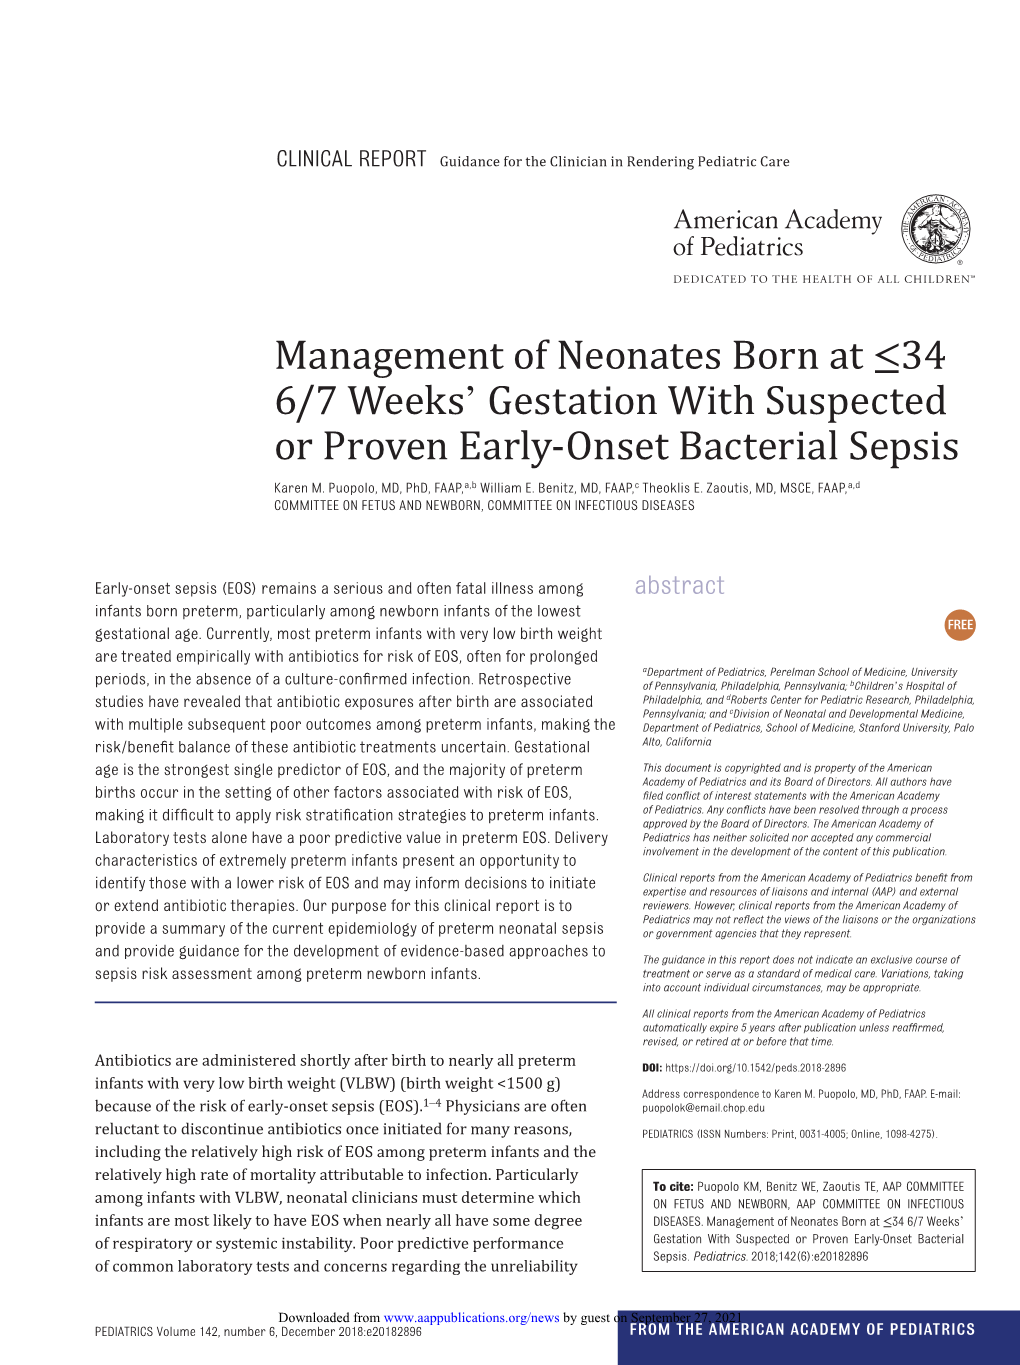 Management of Neonates Born at ≤34 6/7 Weeks' Gestation with Suspected Or Proven Early-Onset Bacterial Sepsis Karen M